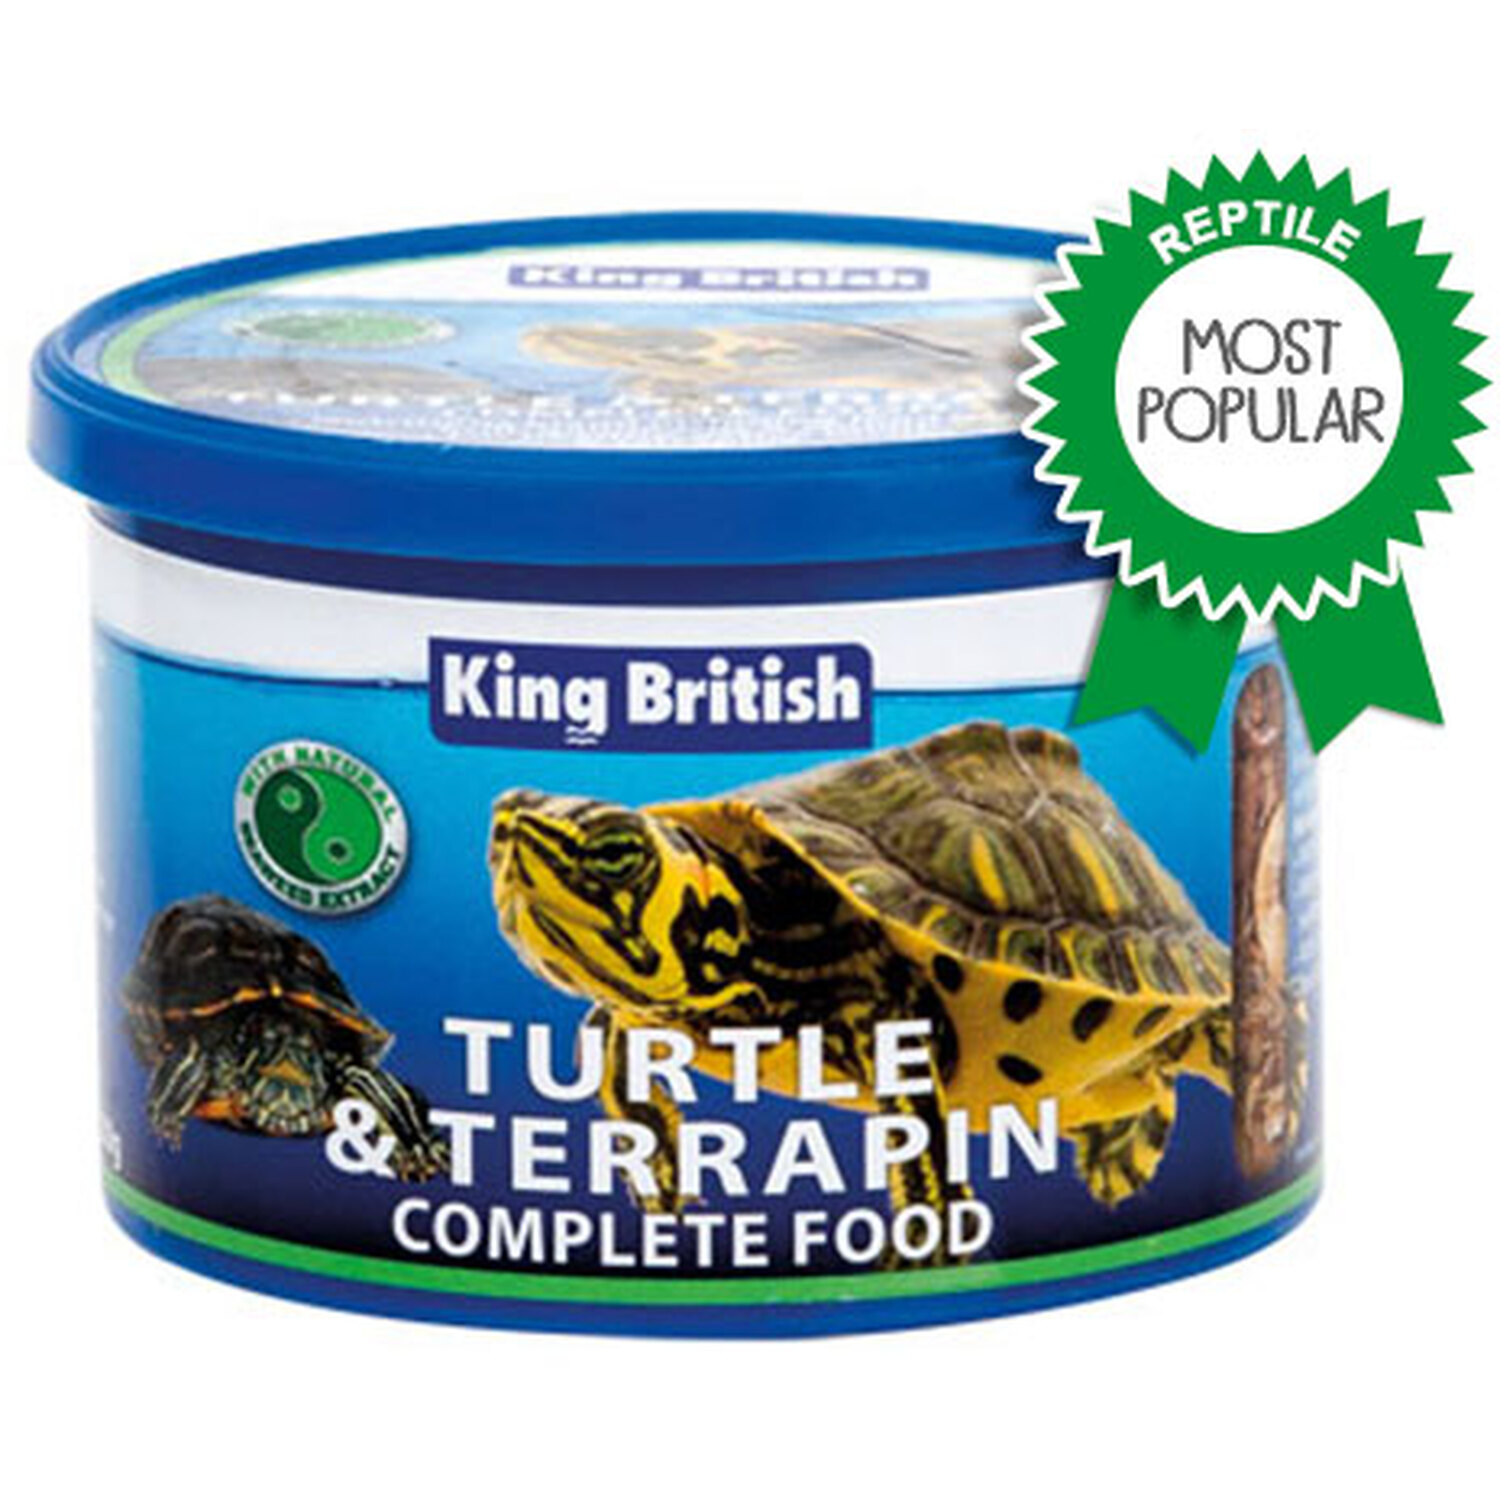 King British Turtle and Terrapin Complete Food 200g Image